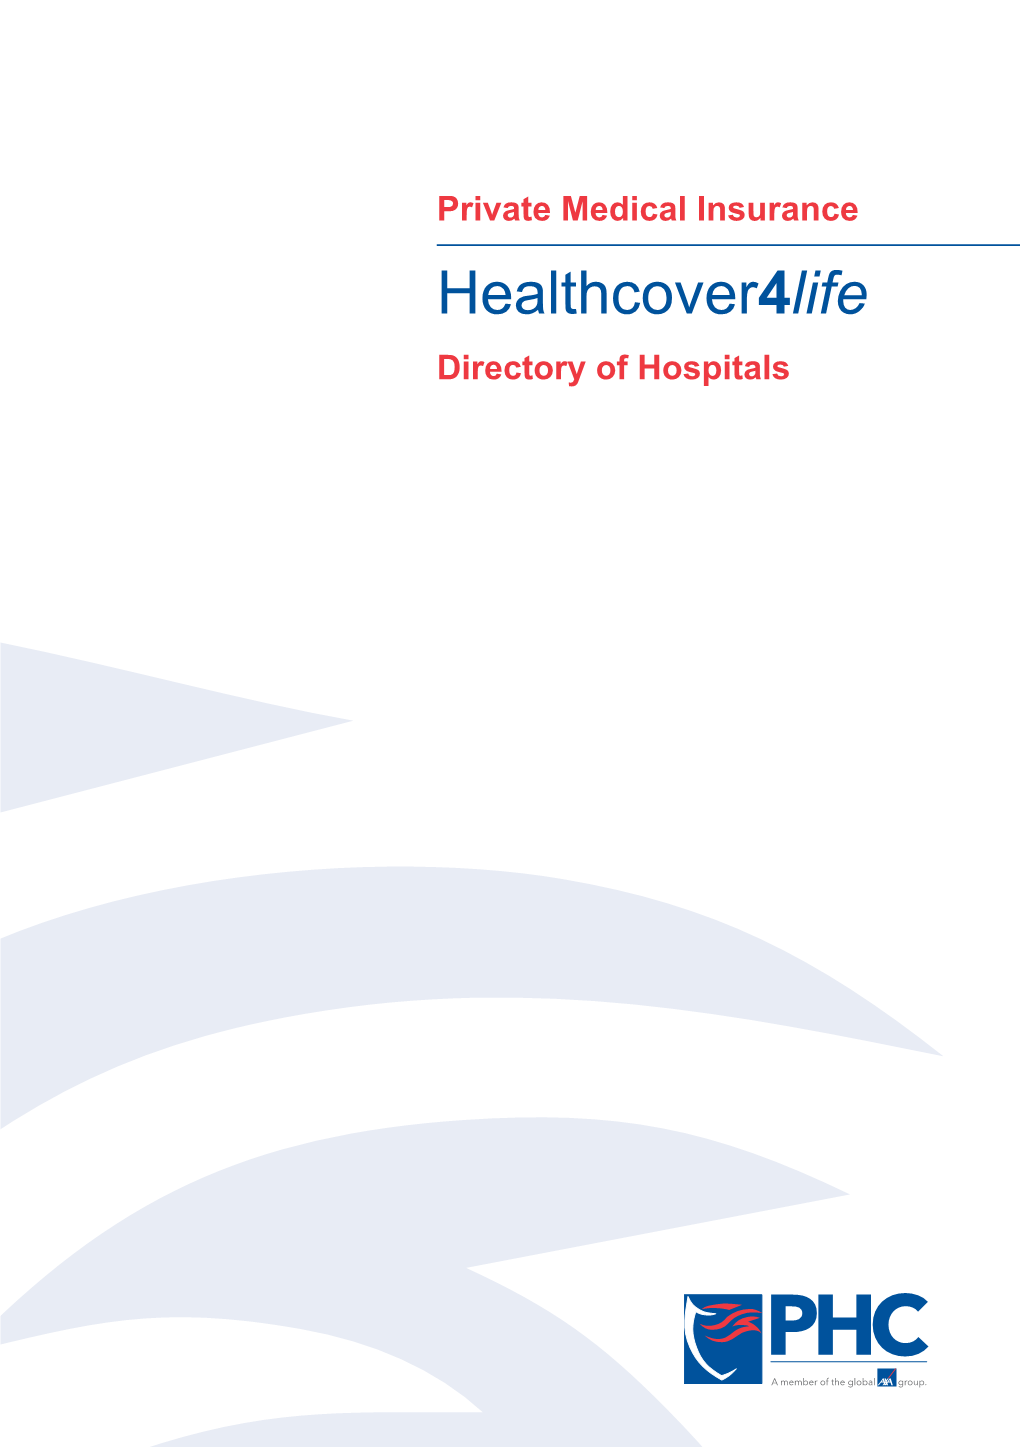 Healthcover4life Directory of Hospitals Contents